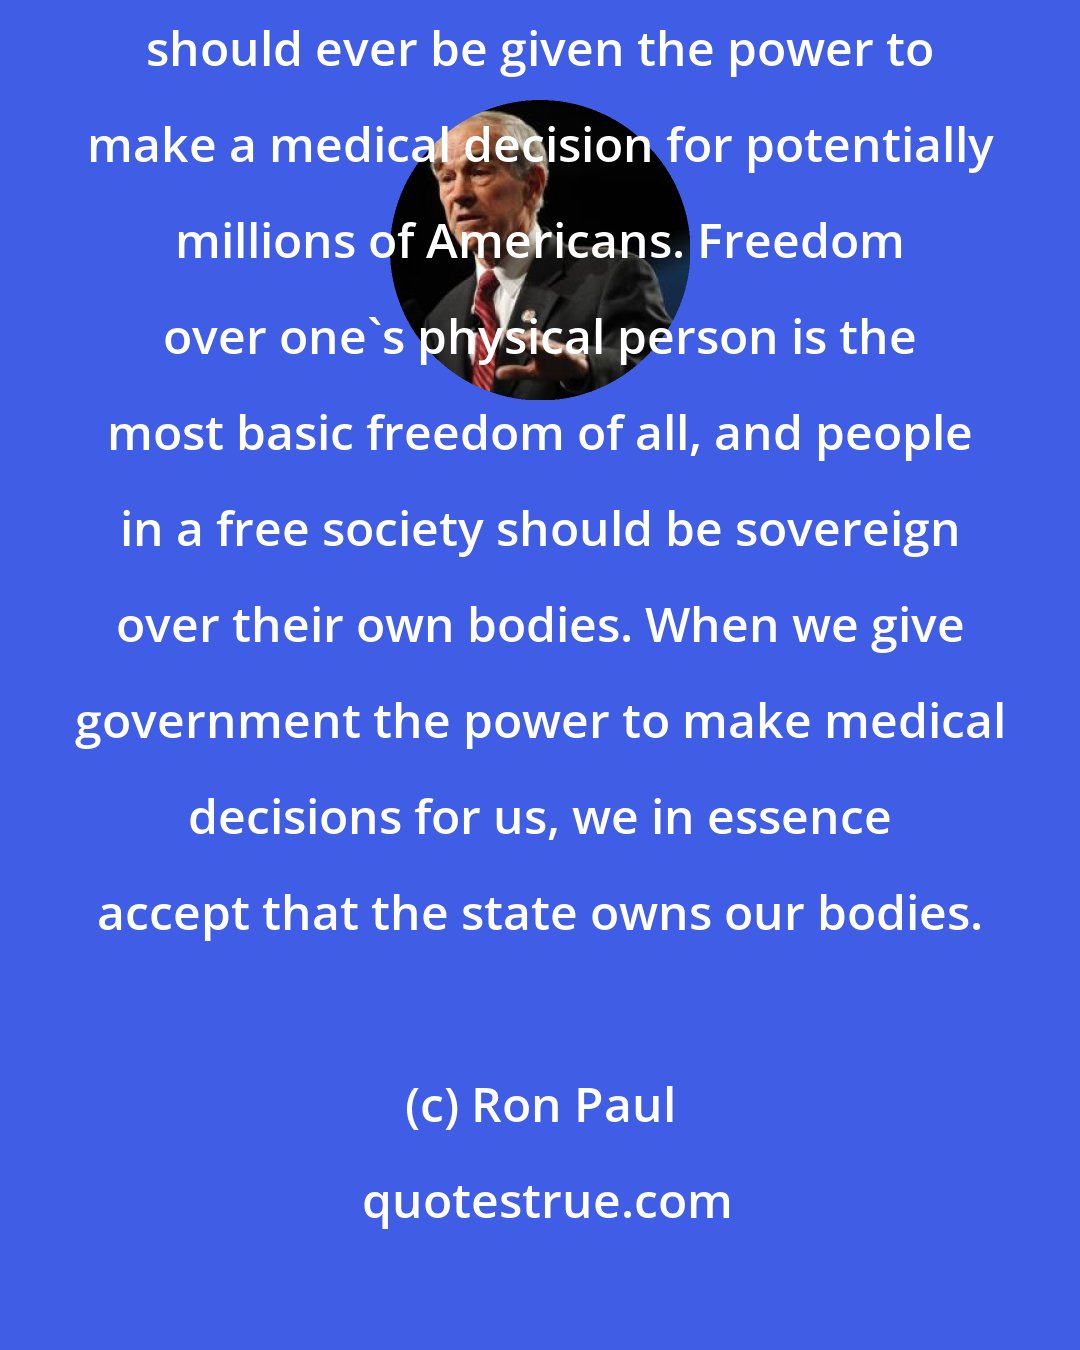 Ron Paul: No single person, including the President of the United States, should ever be given the power to make a medical decision for potentially millions of Americans. Freedom over one's physical person is the most basic freedom of all, and people in a free society should be sovereign over their own bodies. When we give government the power to make medical decisions for us, we in essence accept that the state owns our bodies.